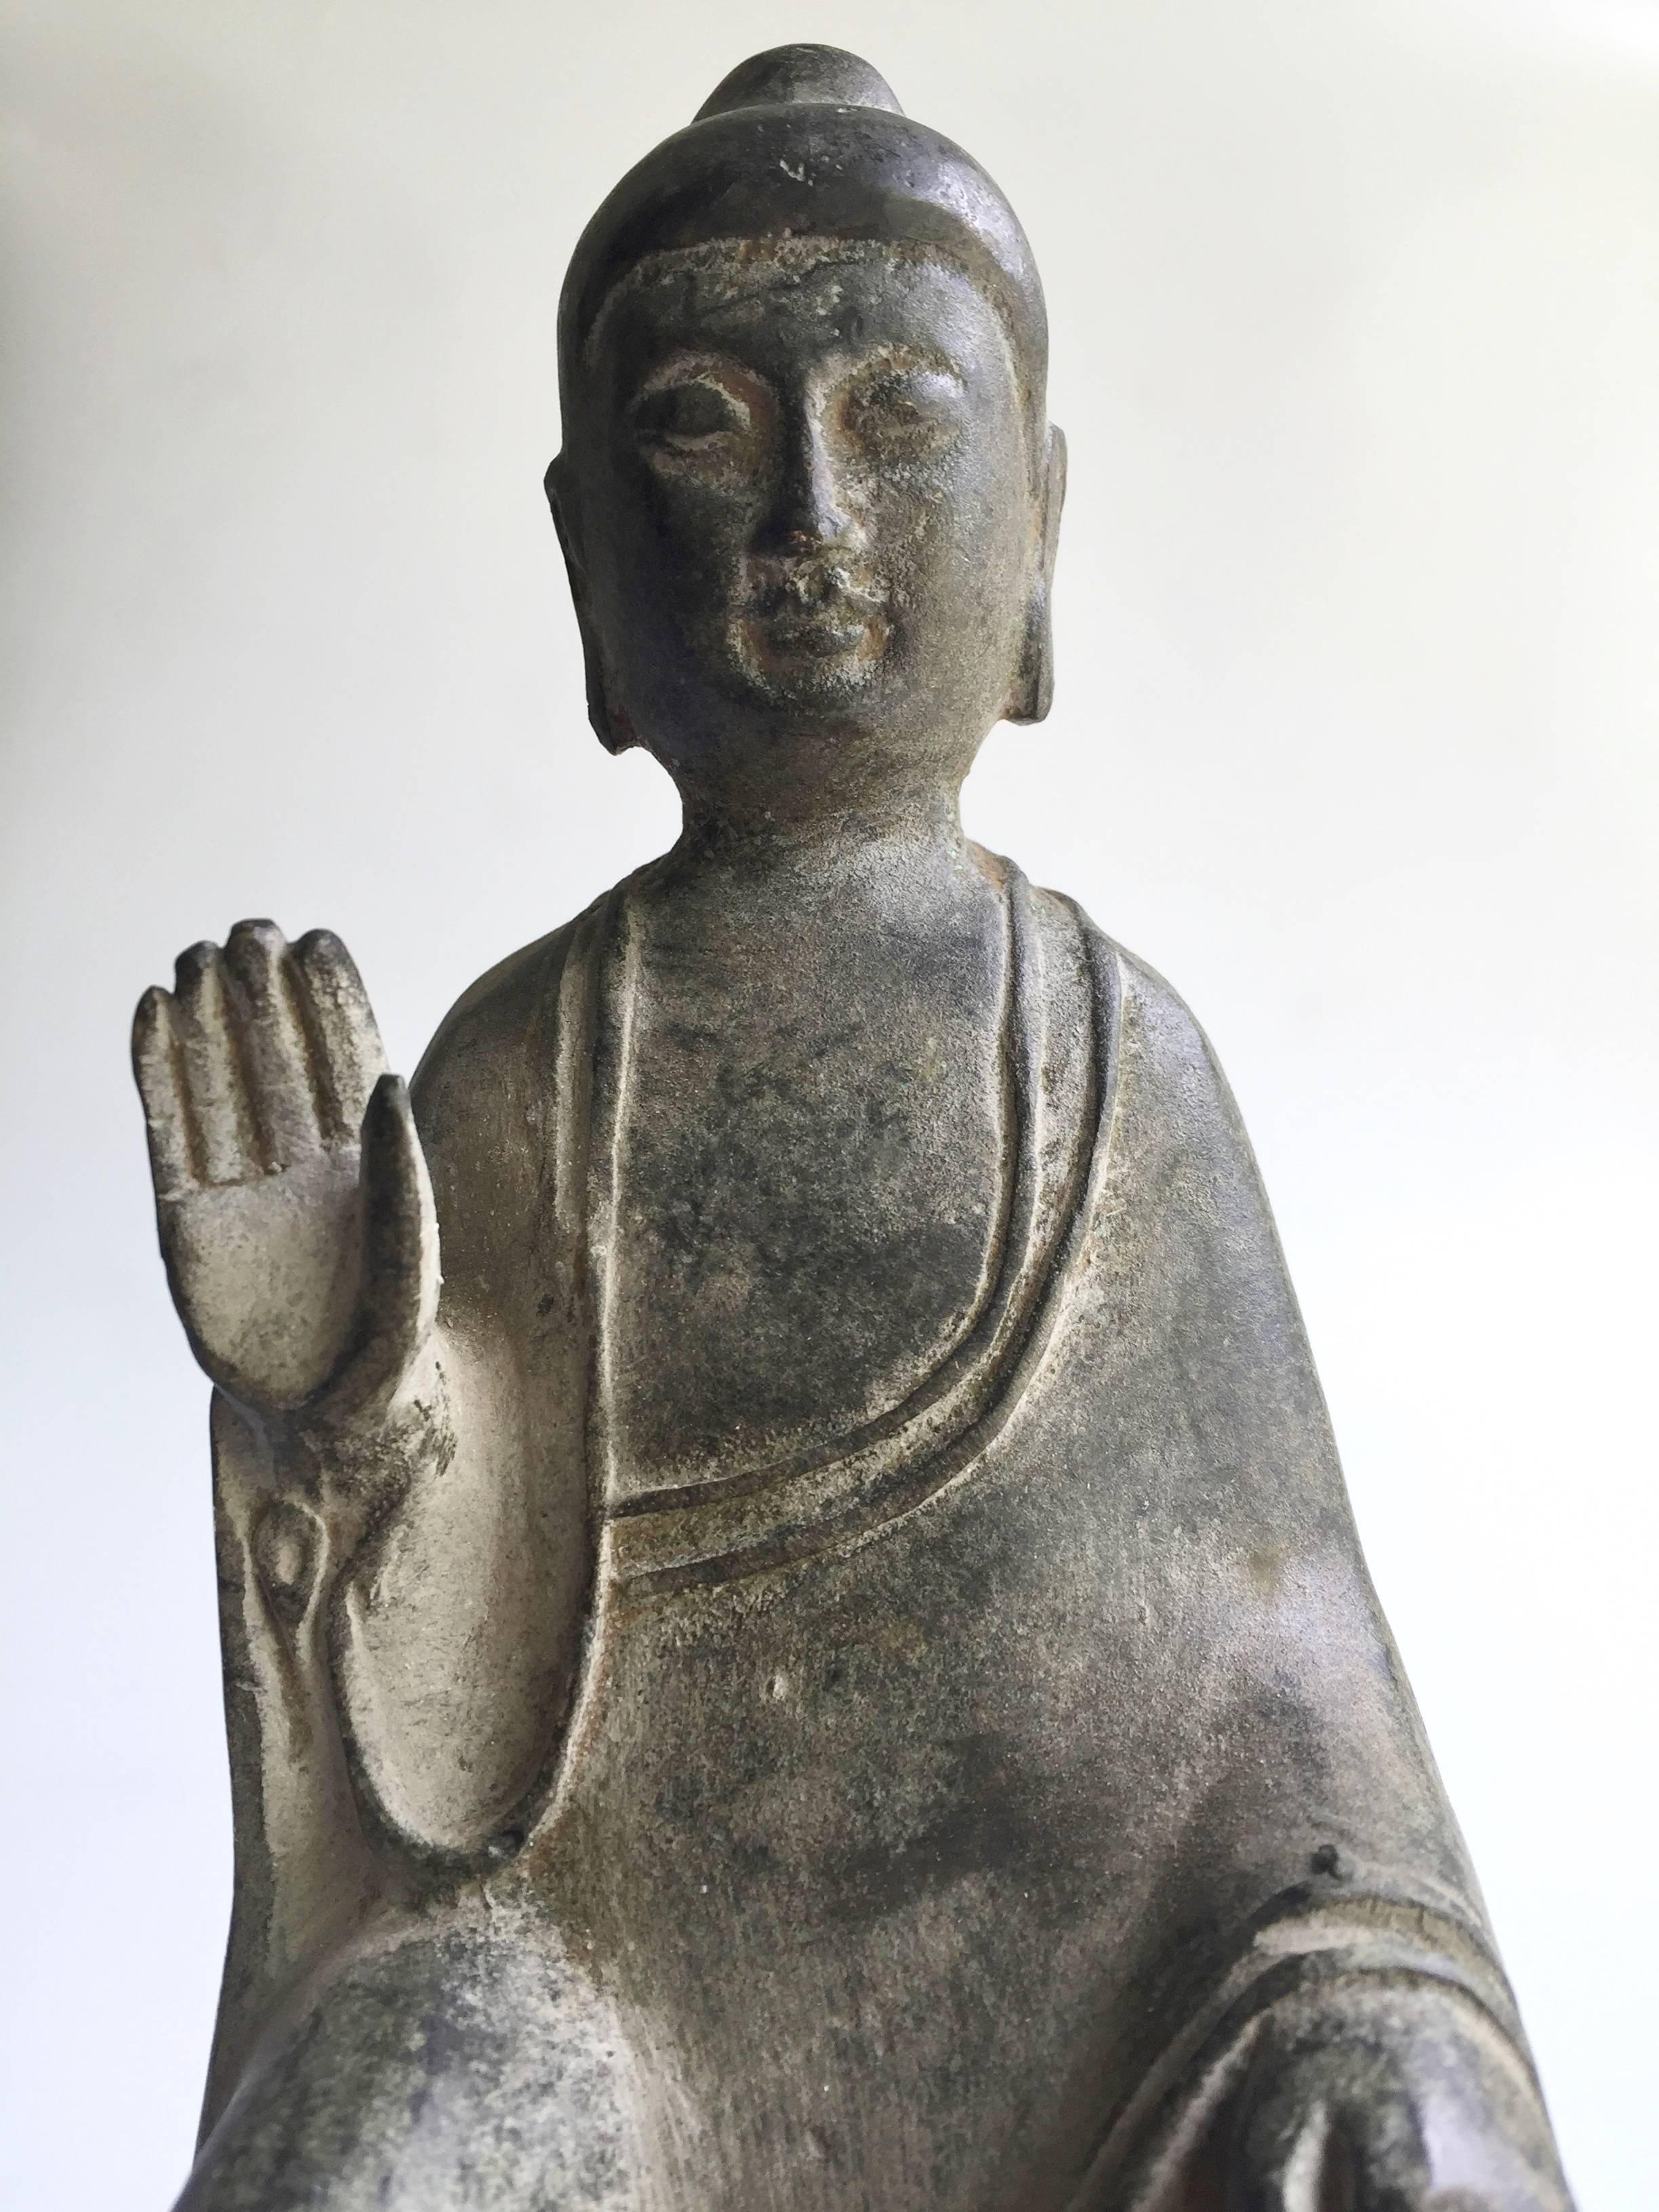 This is a beautiful antique bronze piece that depicts Buddha with the No-Fear Mudra. The lines are fluid and elegant, his face is soft and expressions calm. Both his feet rest on lion patterned stumps, which symbolize protection and guidance.